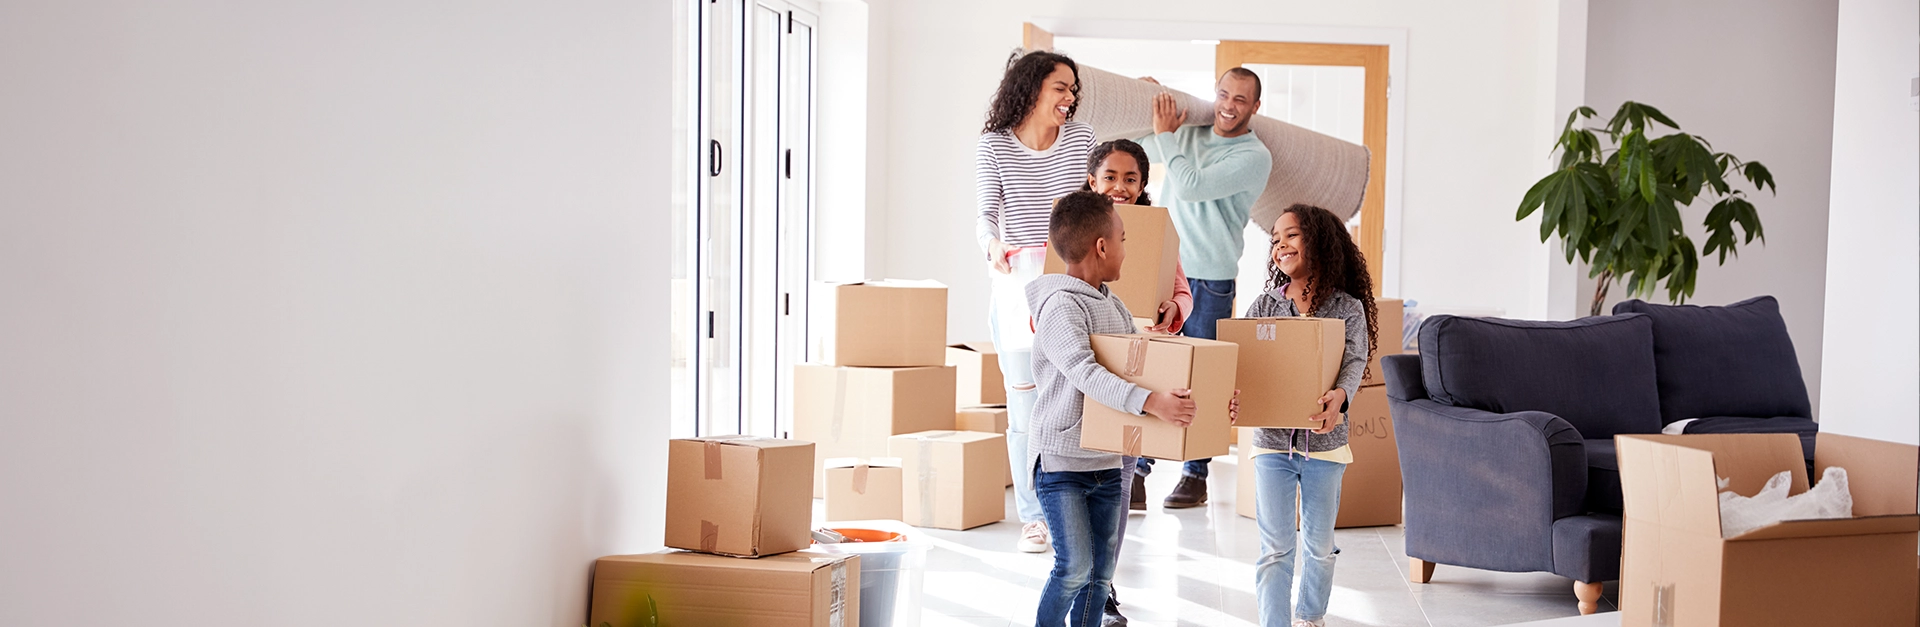 Family of five carrying moving boxes in living room